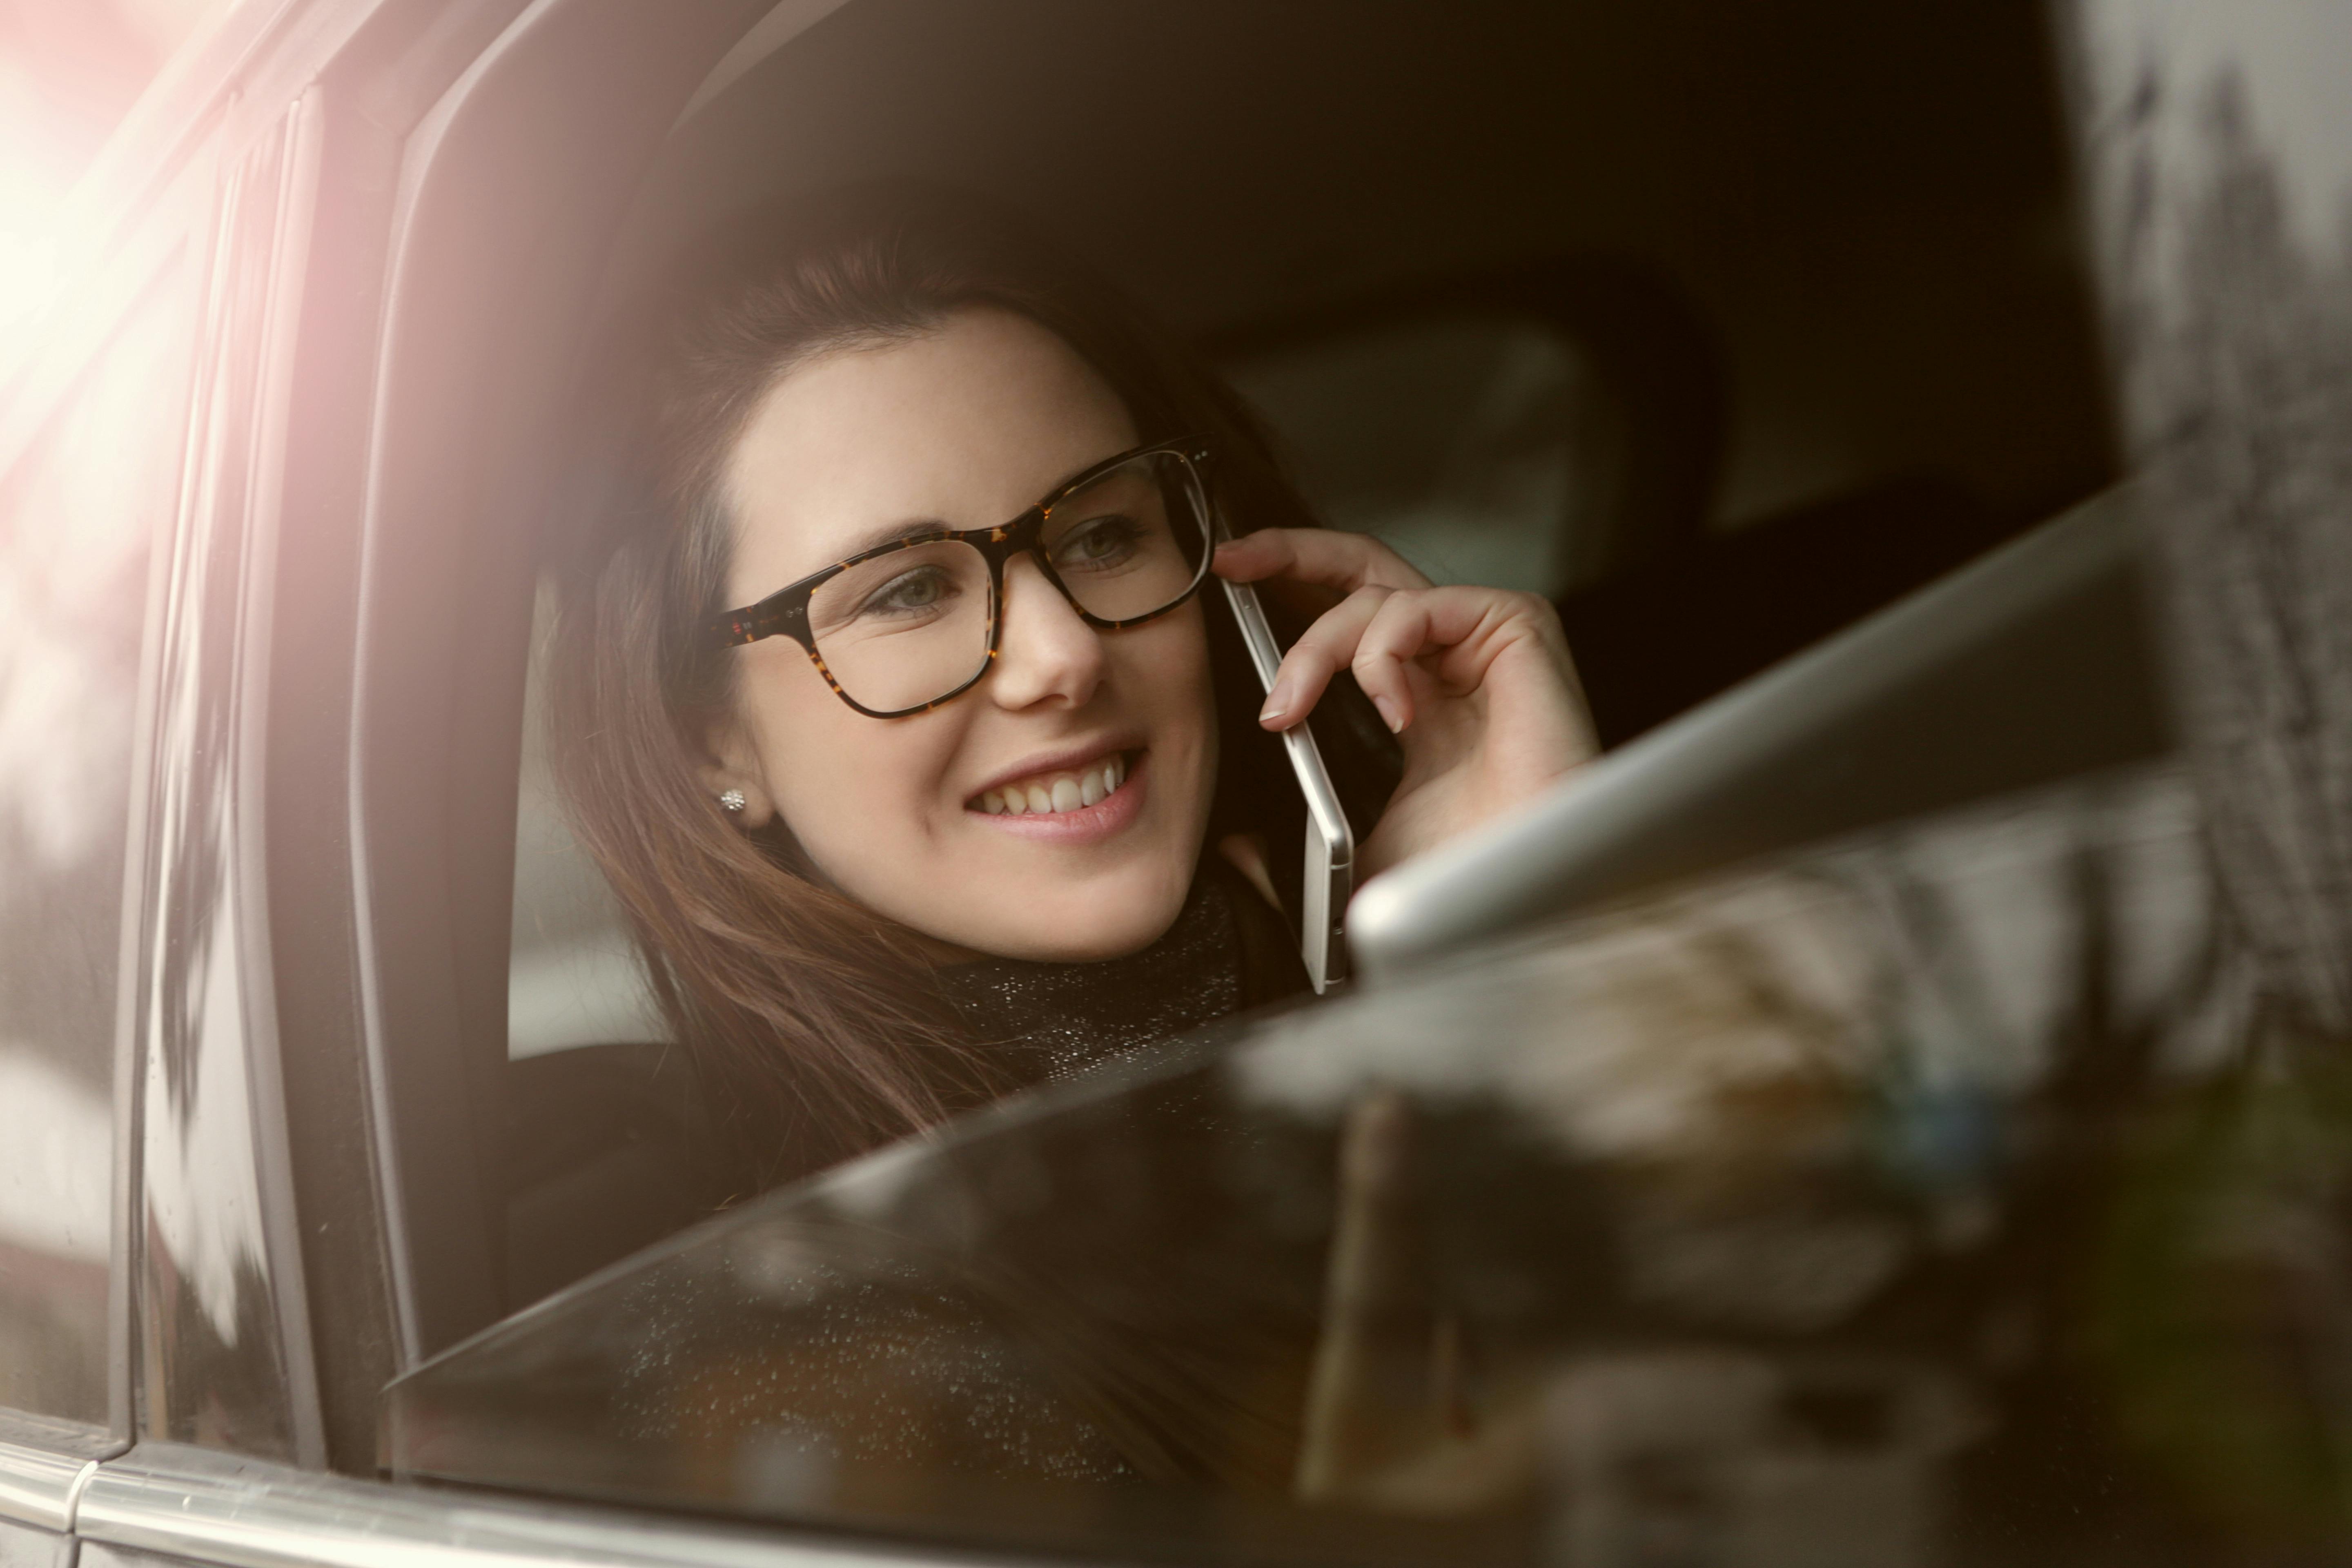 A woman smiling while on phone | Source: Pexels